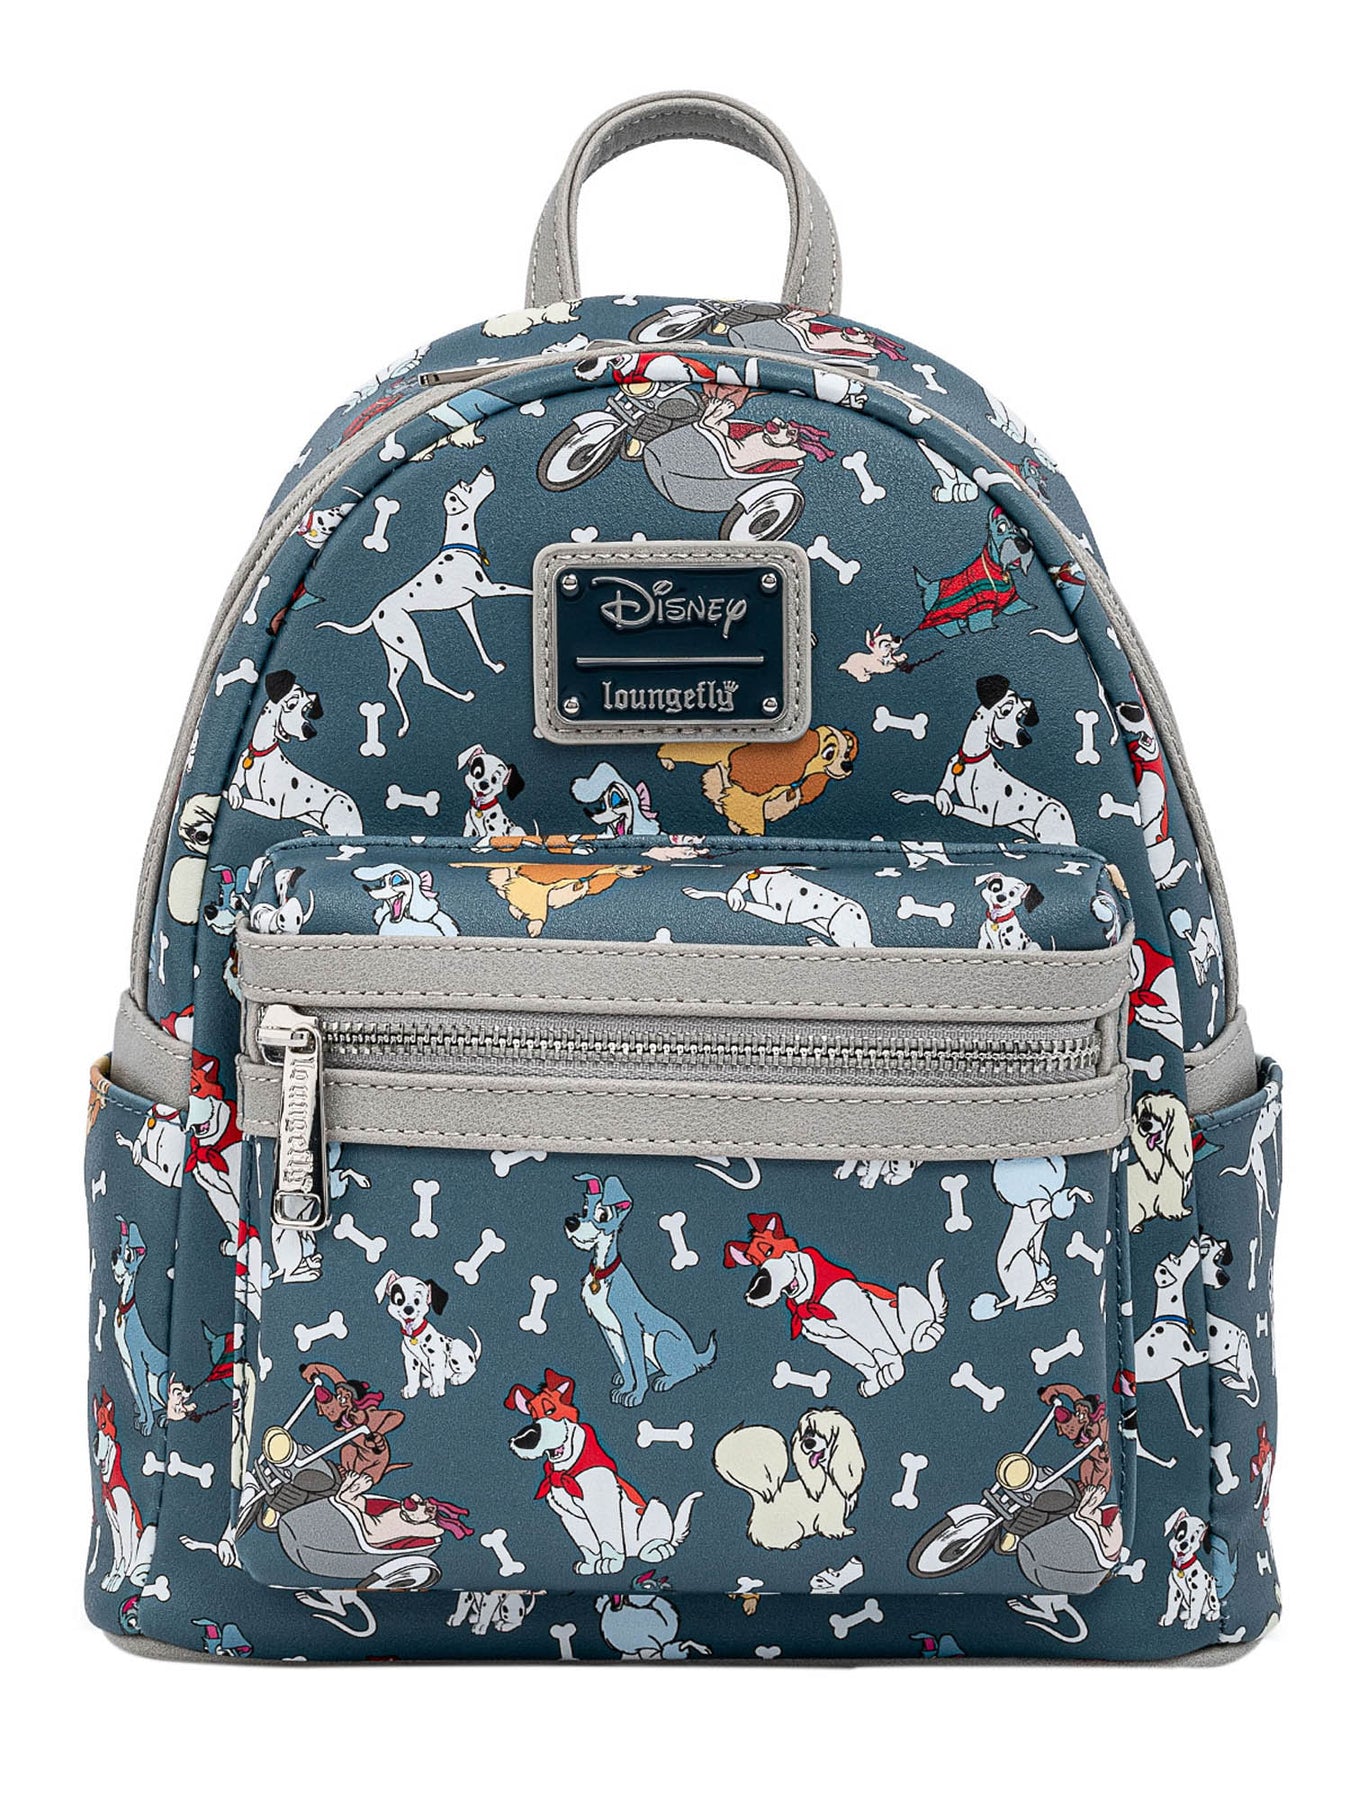 Loungefly x Disney Dogs Mini Backpack Handbag All-Over Print 101 Dalma –  Open and Clothing